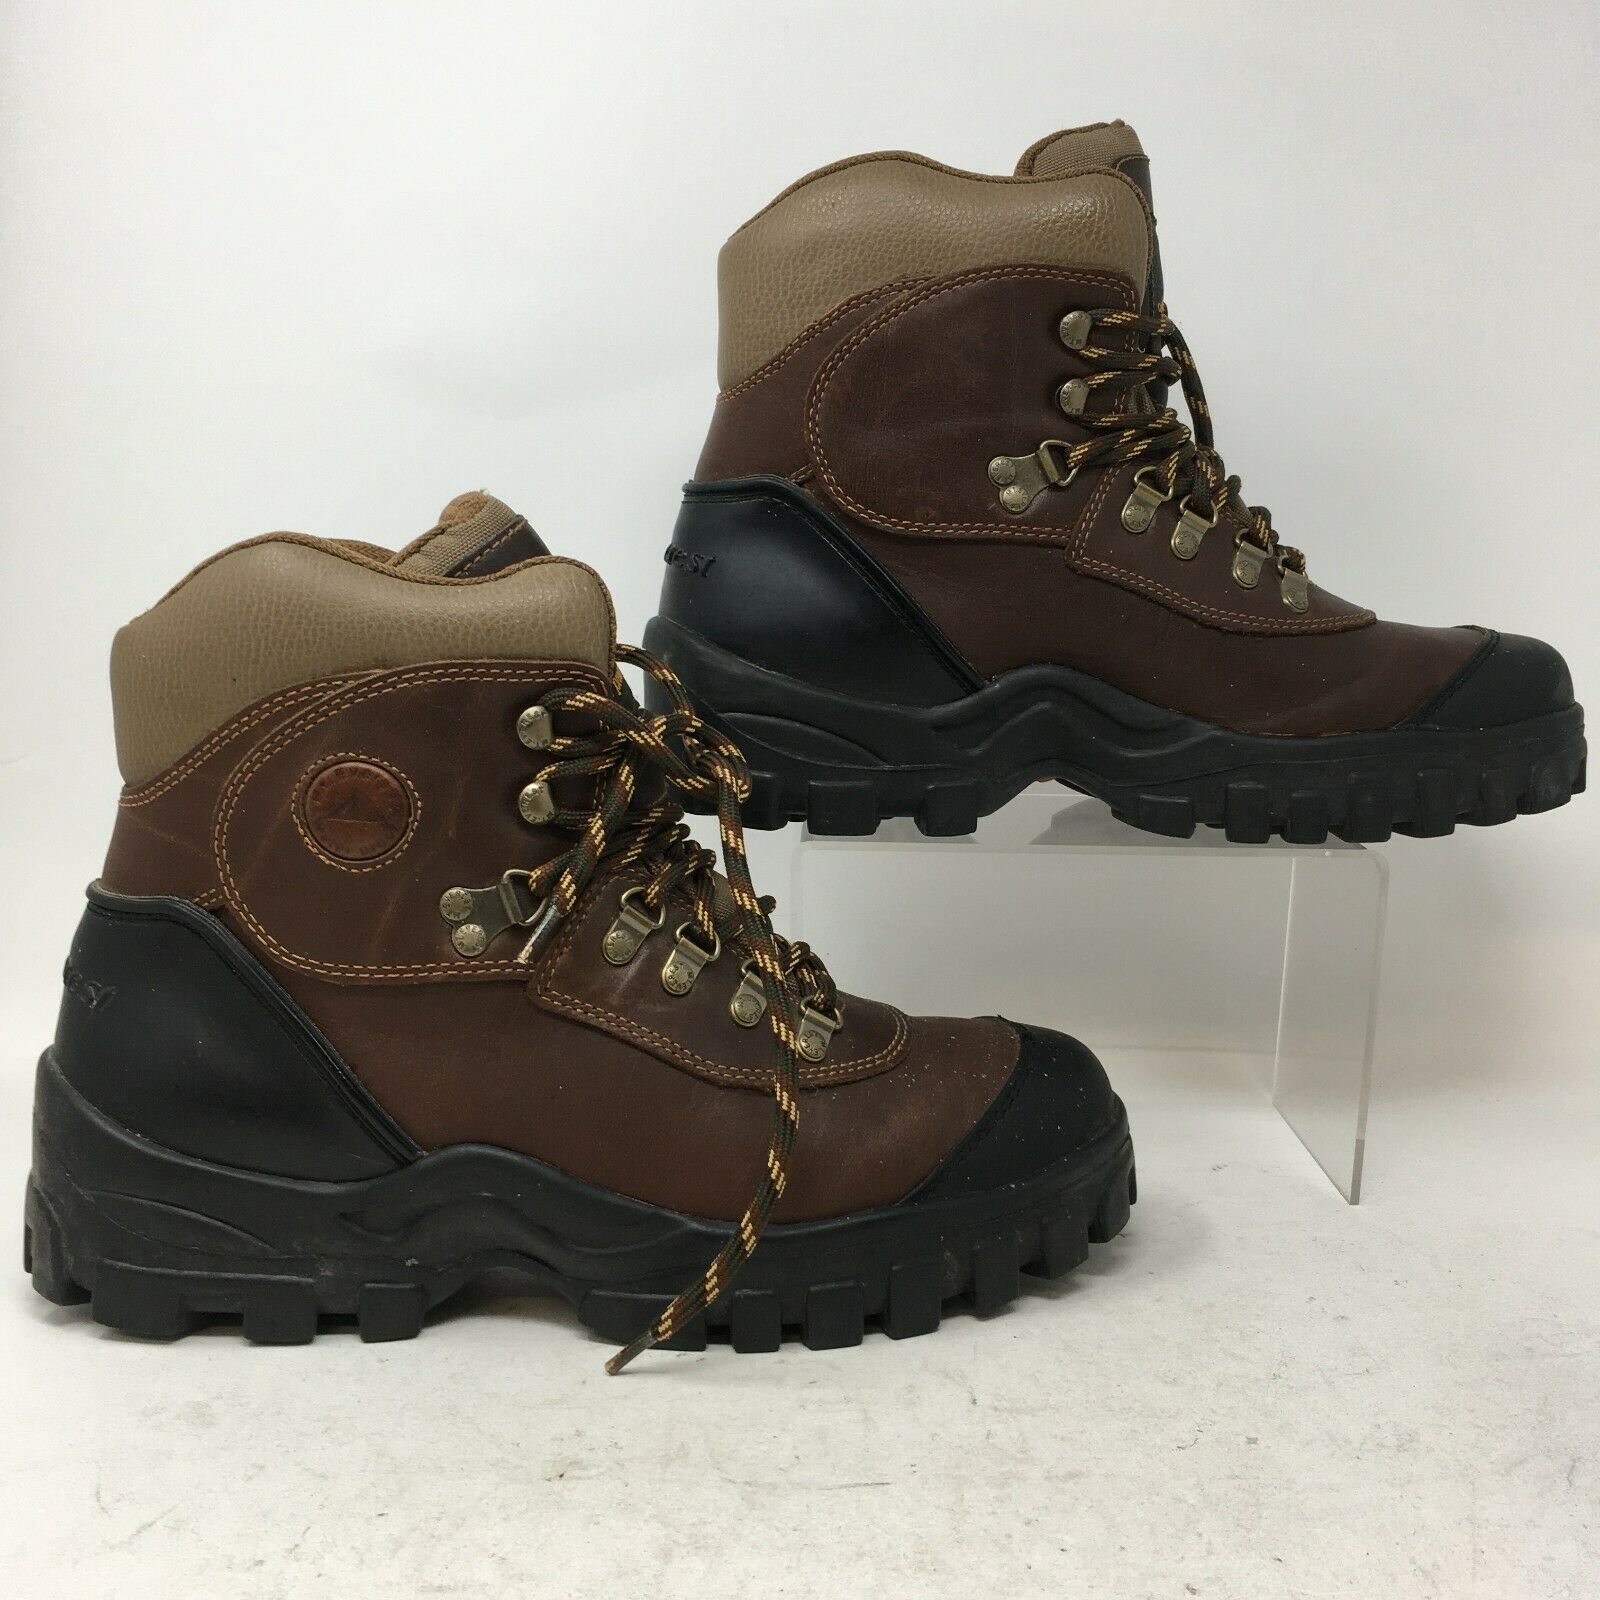 Mt Everest Jim Dry Hiking Boots Mens 10.5 Brown Leather Waterproof Lace Up